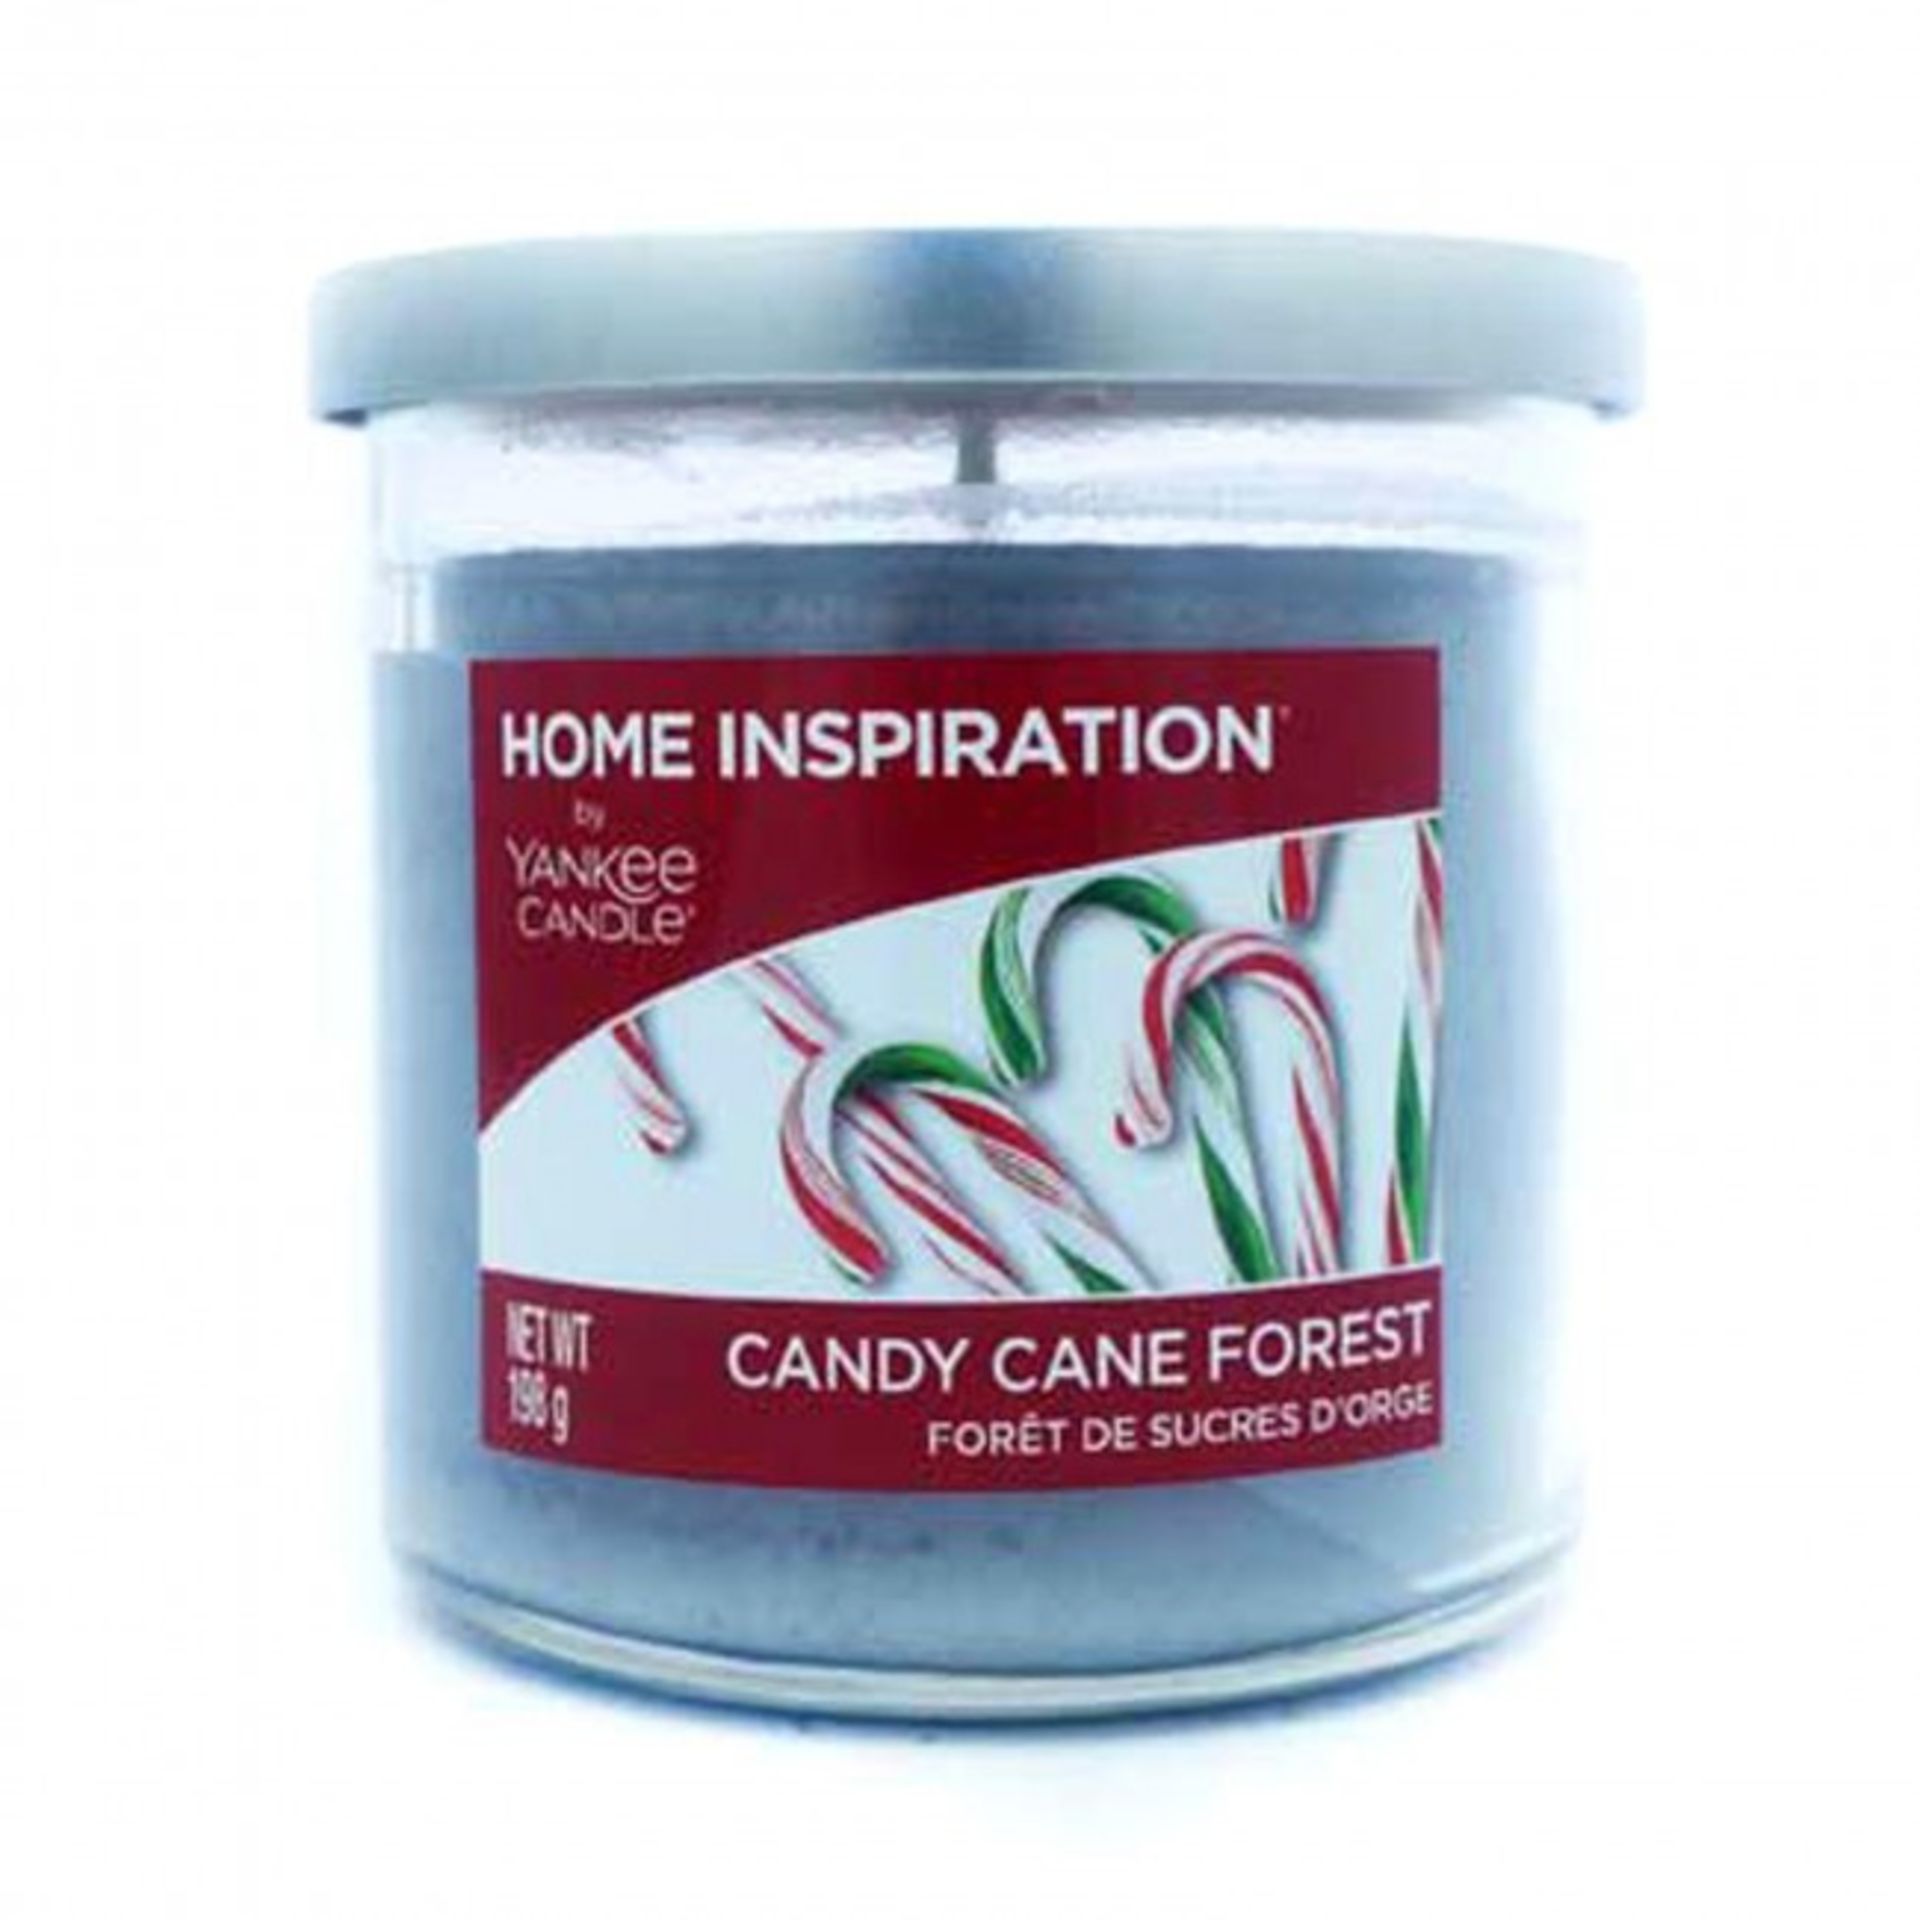 V Brand New Home Inspiration by Yankee Candle Candy Cane Forest 198g Tumbler Candle - ISP £7.99